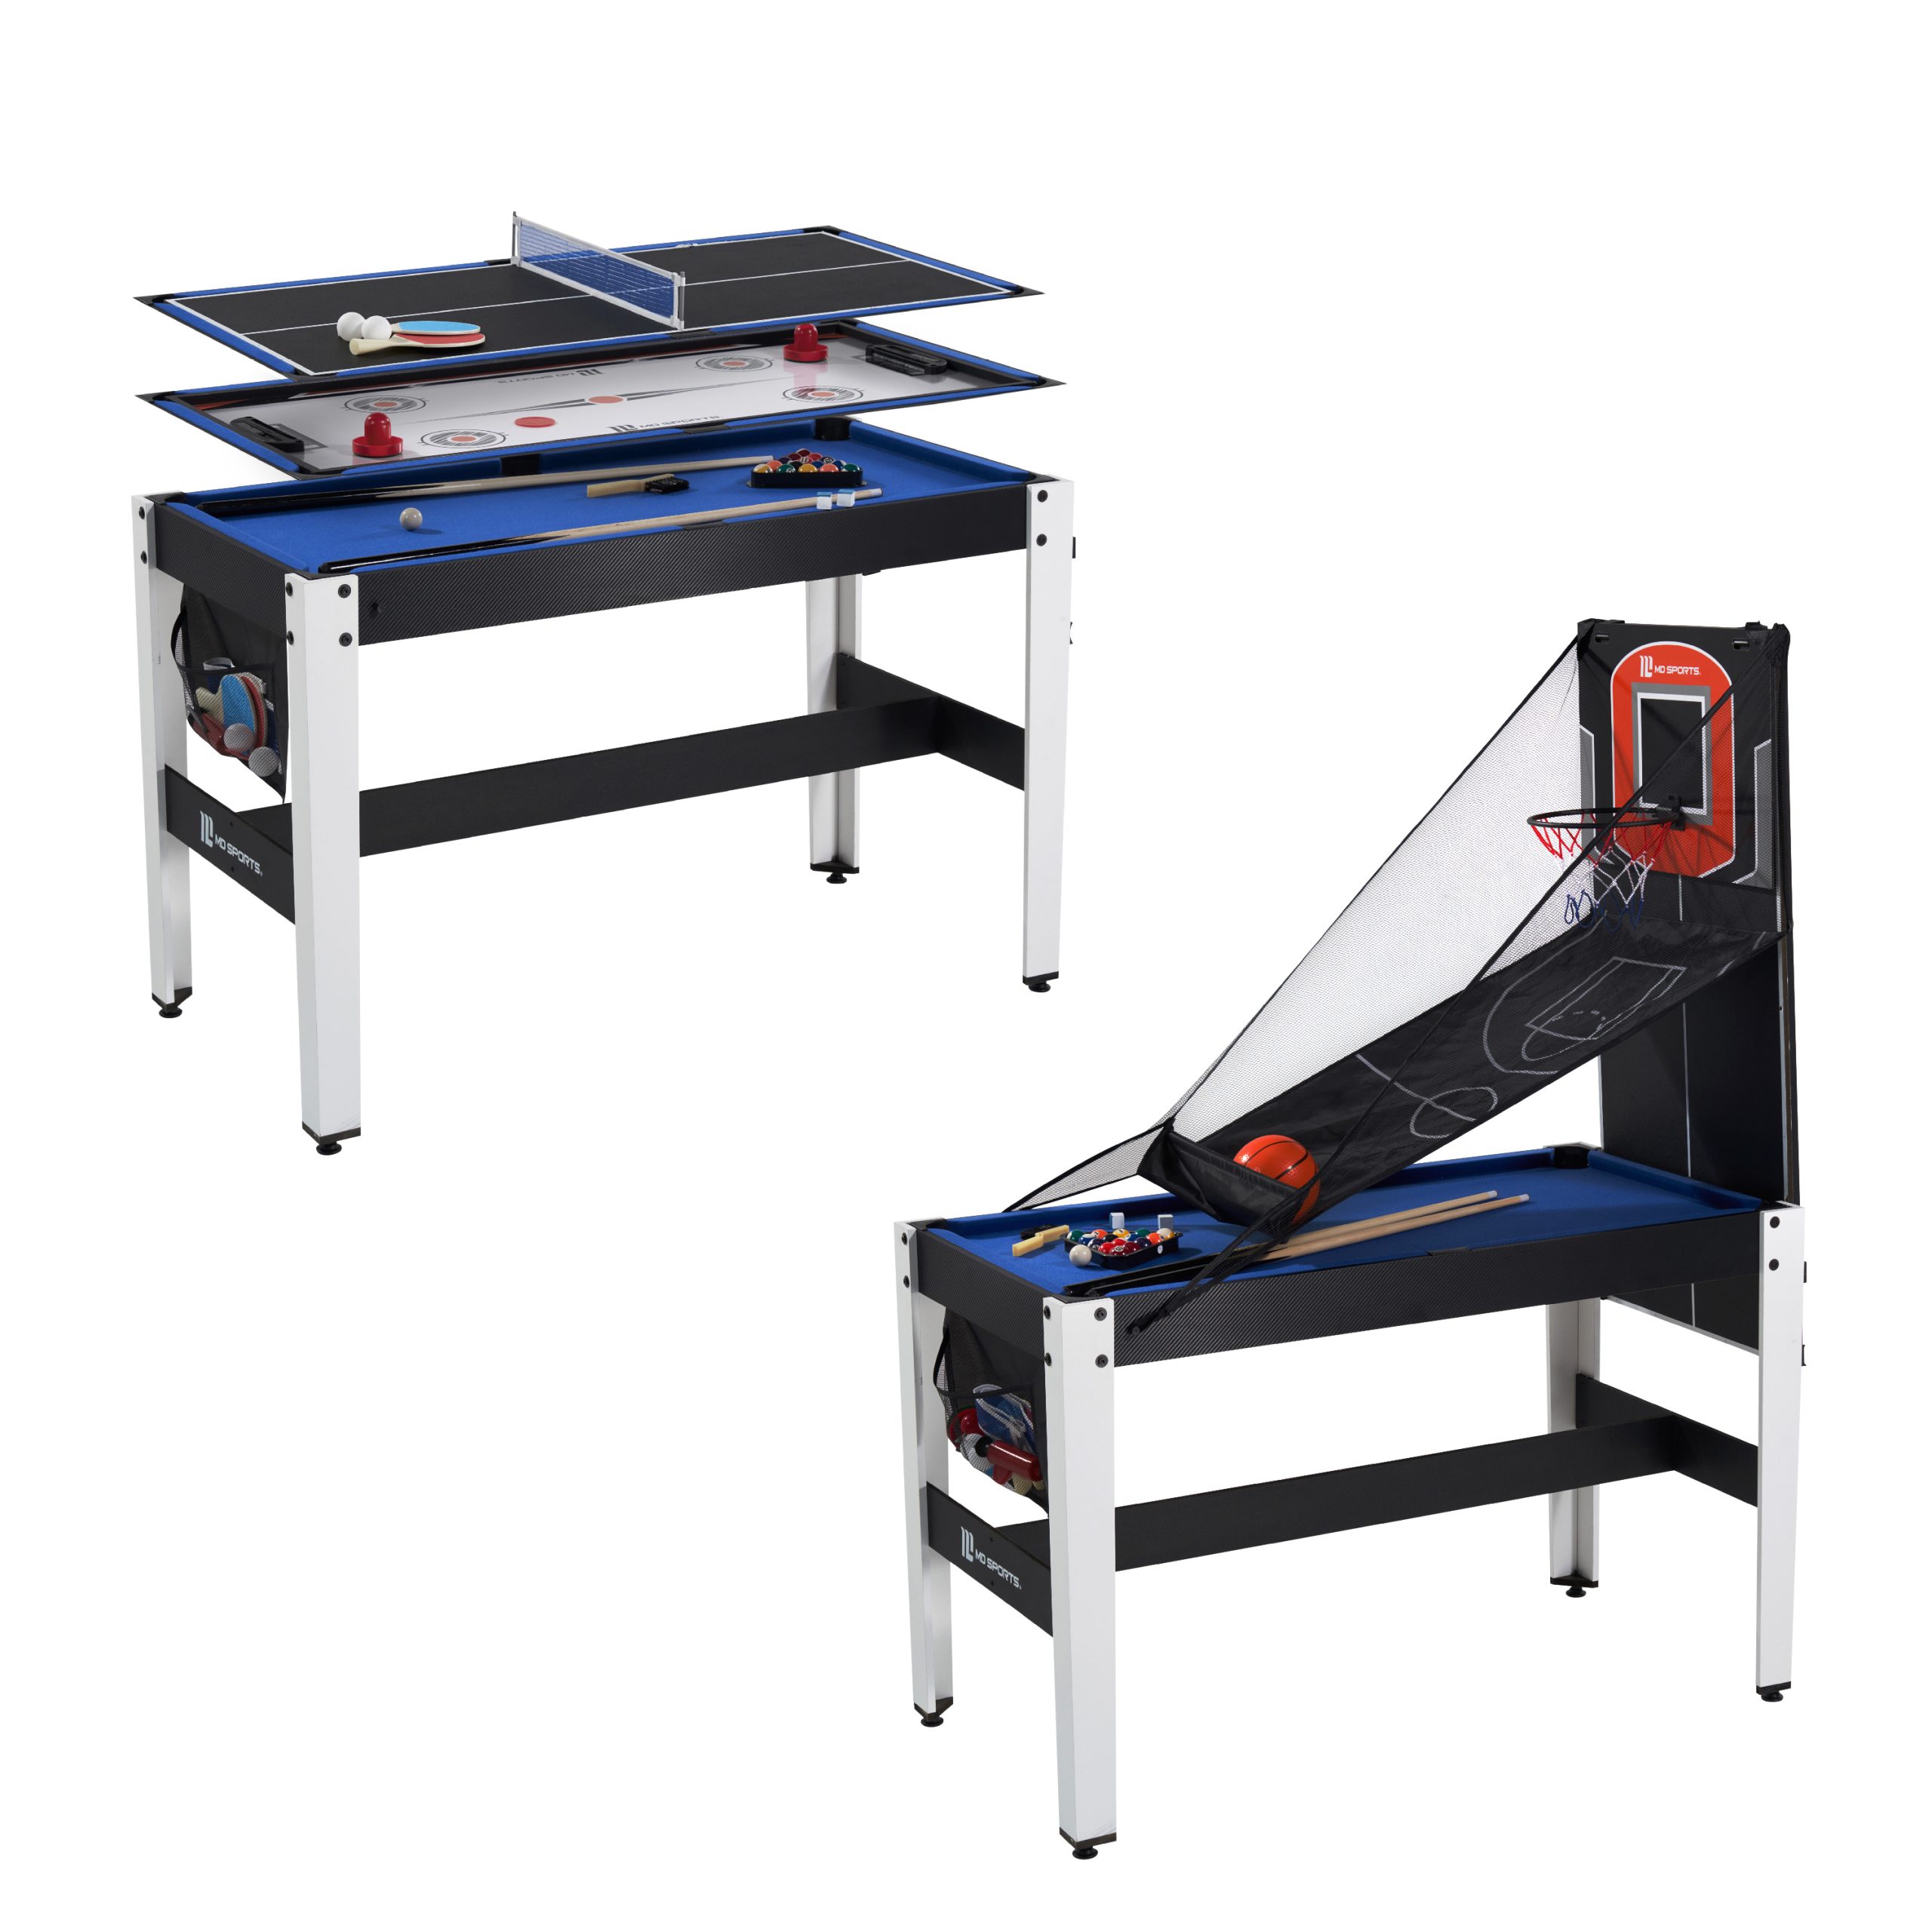 MD Sports 4-in-1 Multi-Game Swivel Combo Table with its variations